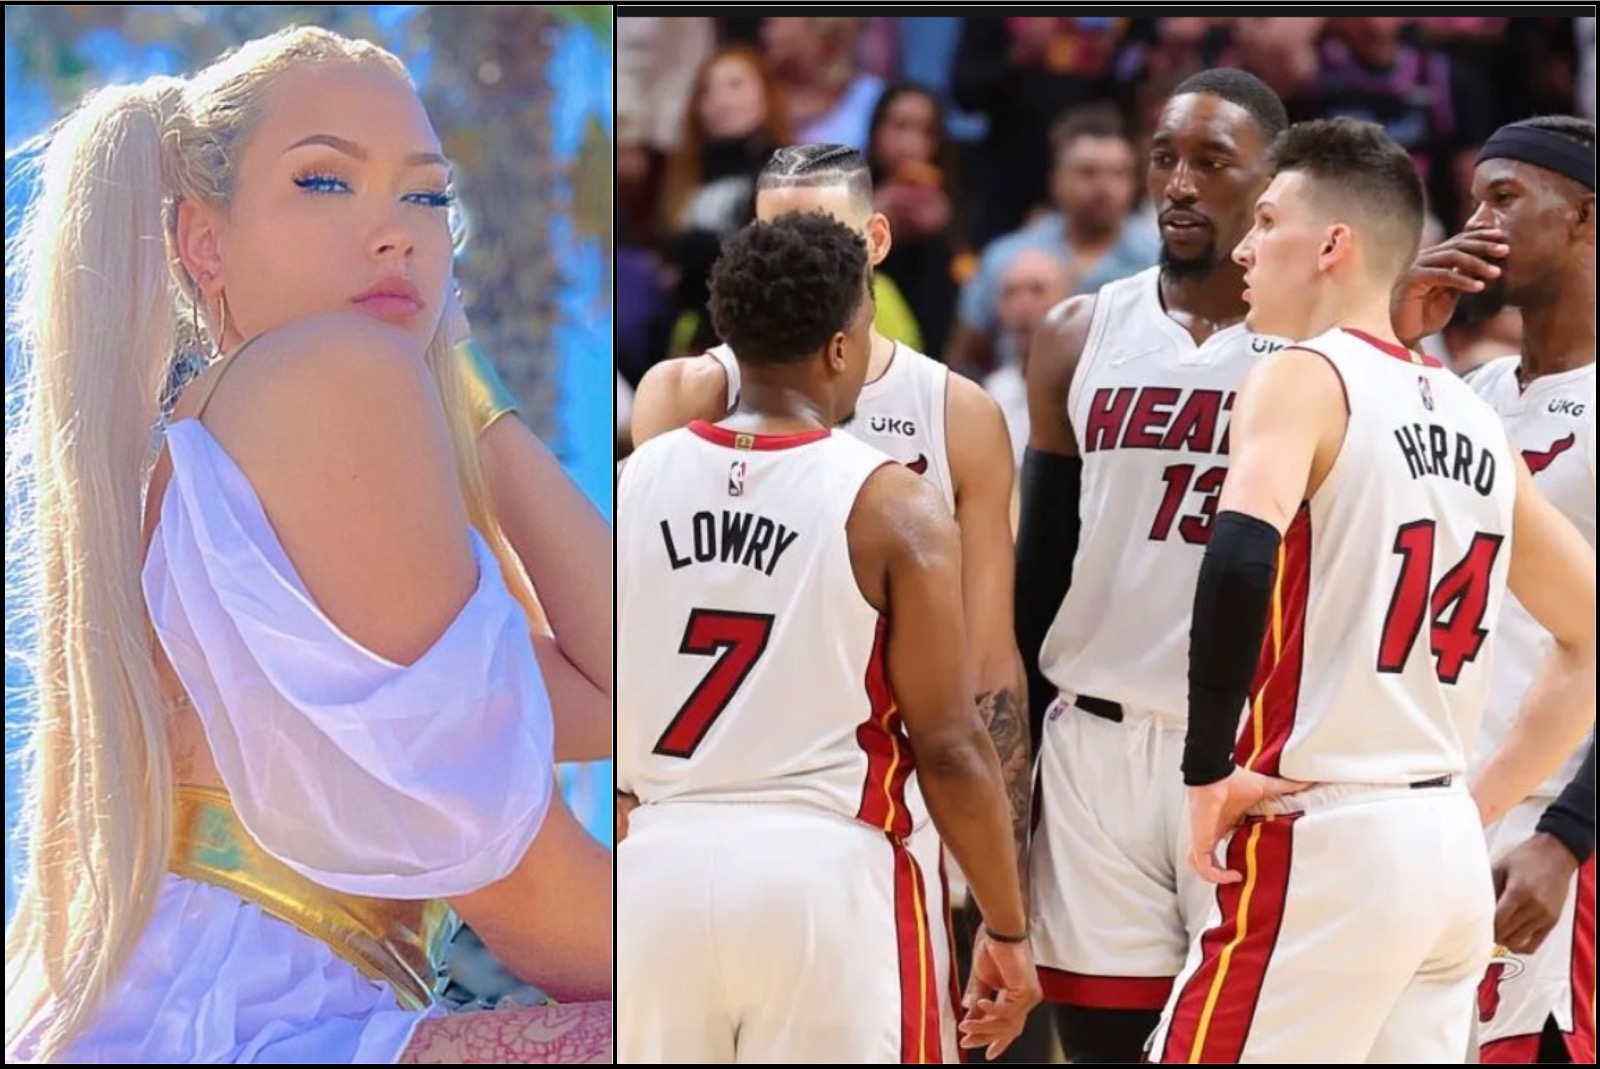 Adult Film Star Hayley Murders Says She Had Threesome With HEAT Player and Woman Who Was Actually a Man